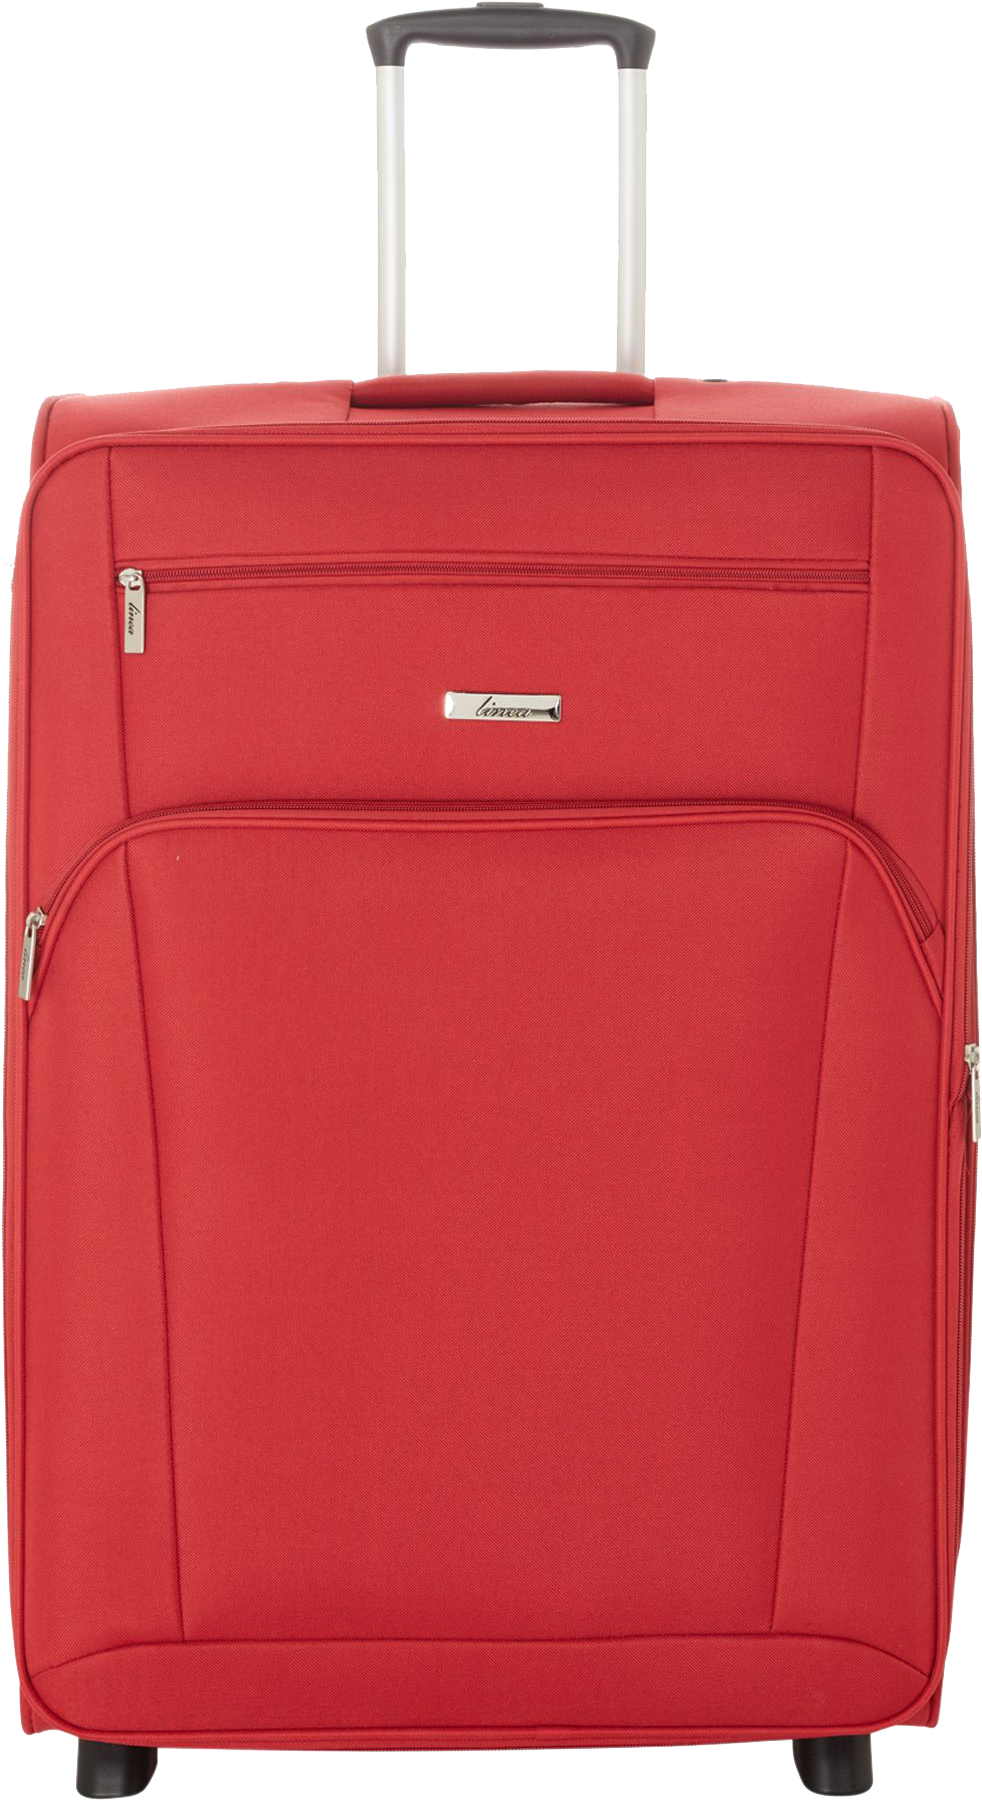 Red Fabric Suitcase Upright PNG